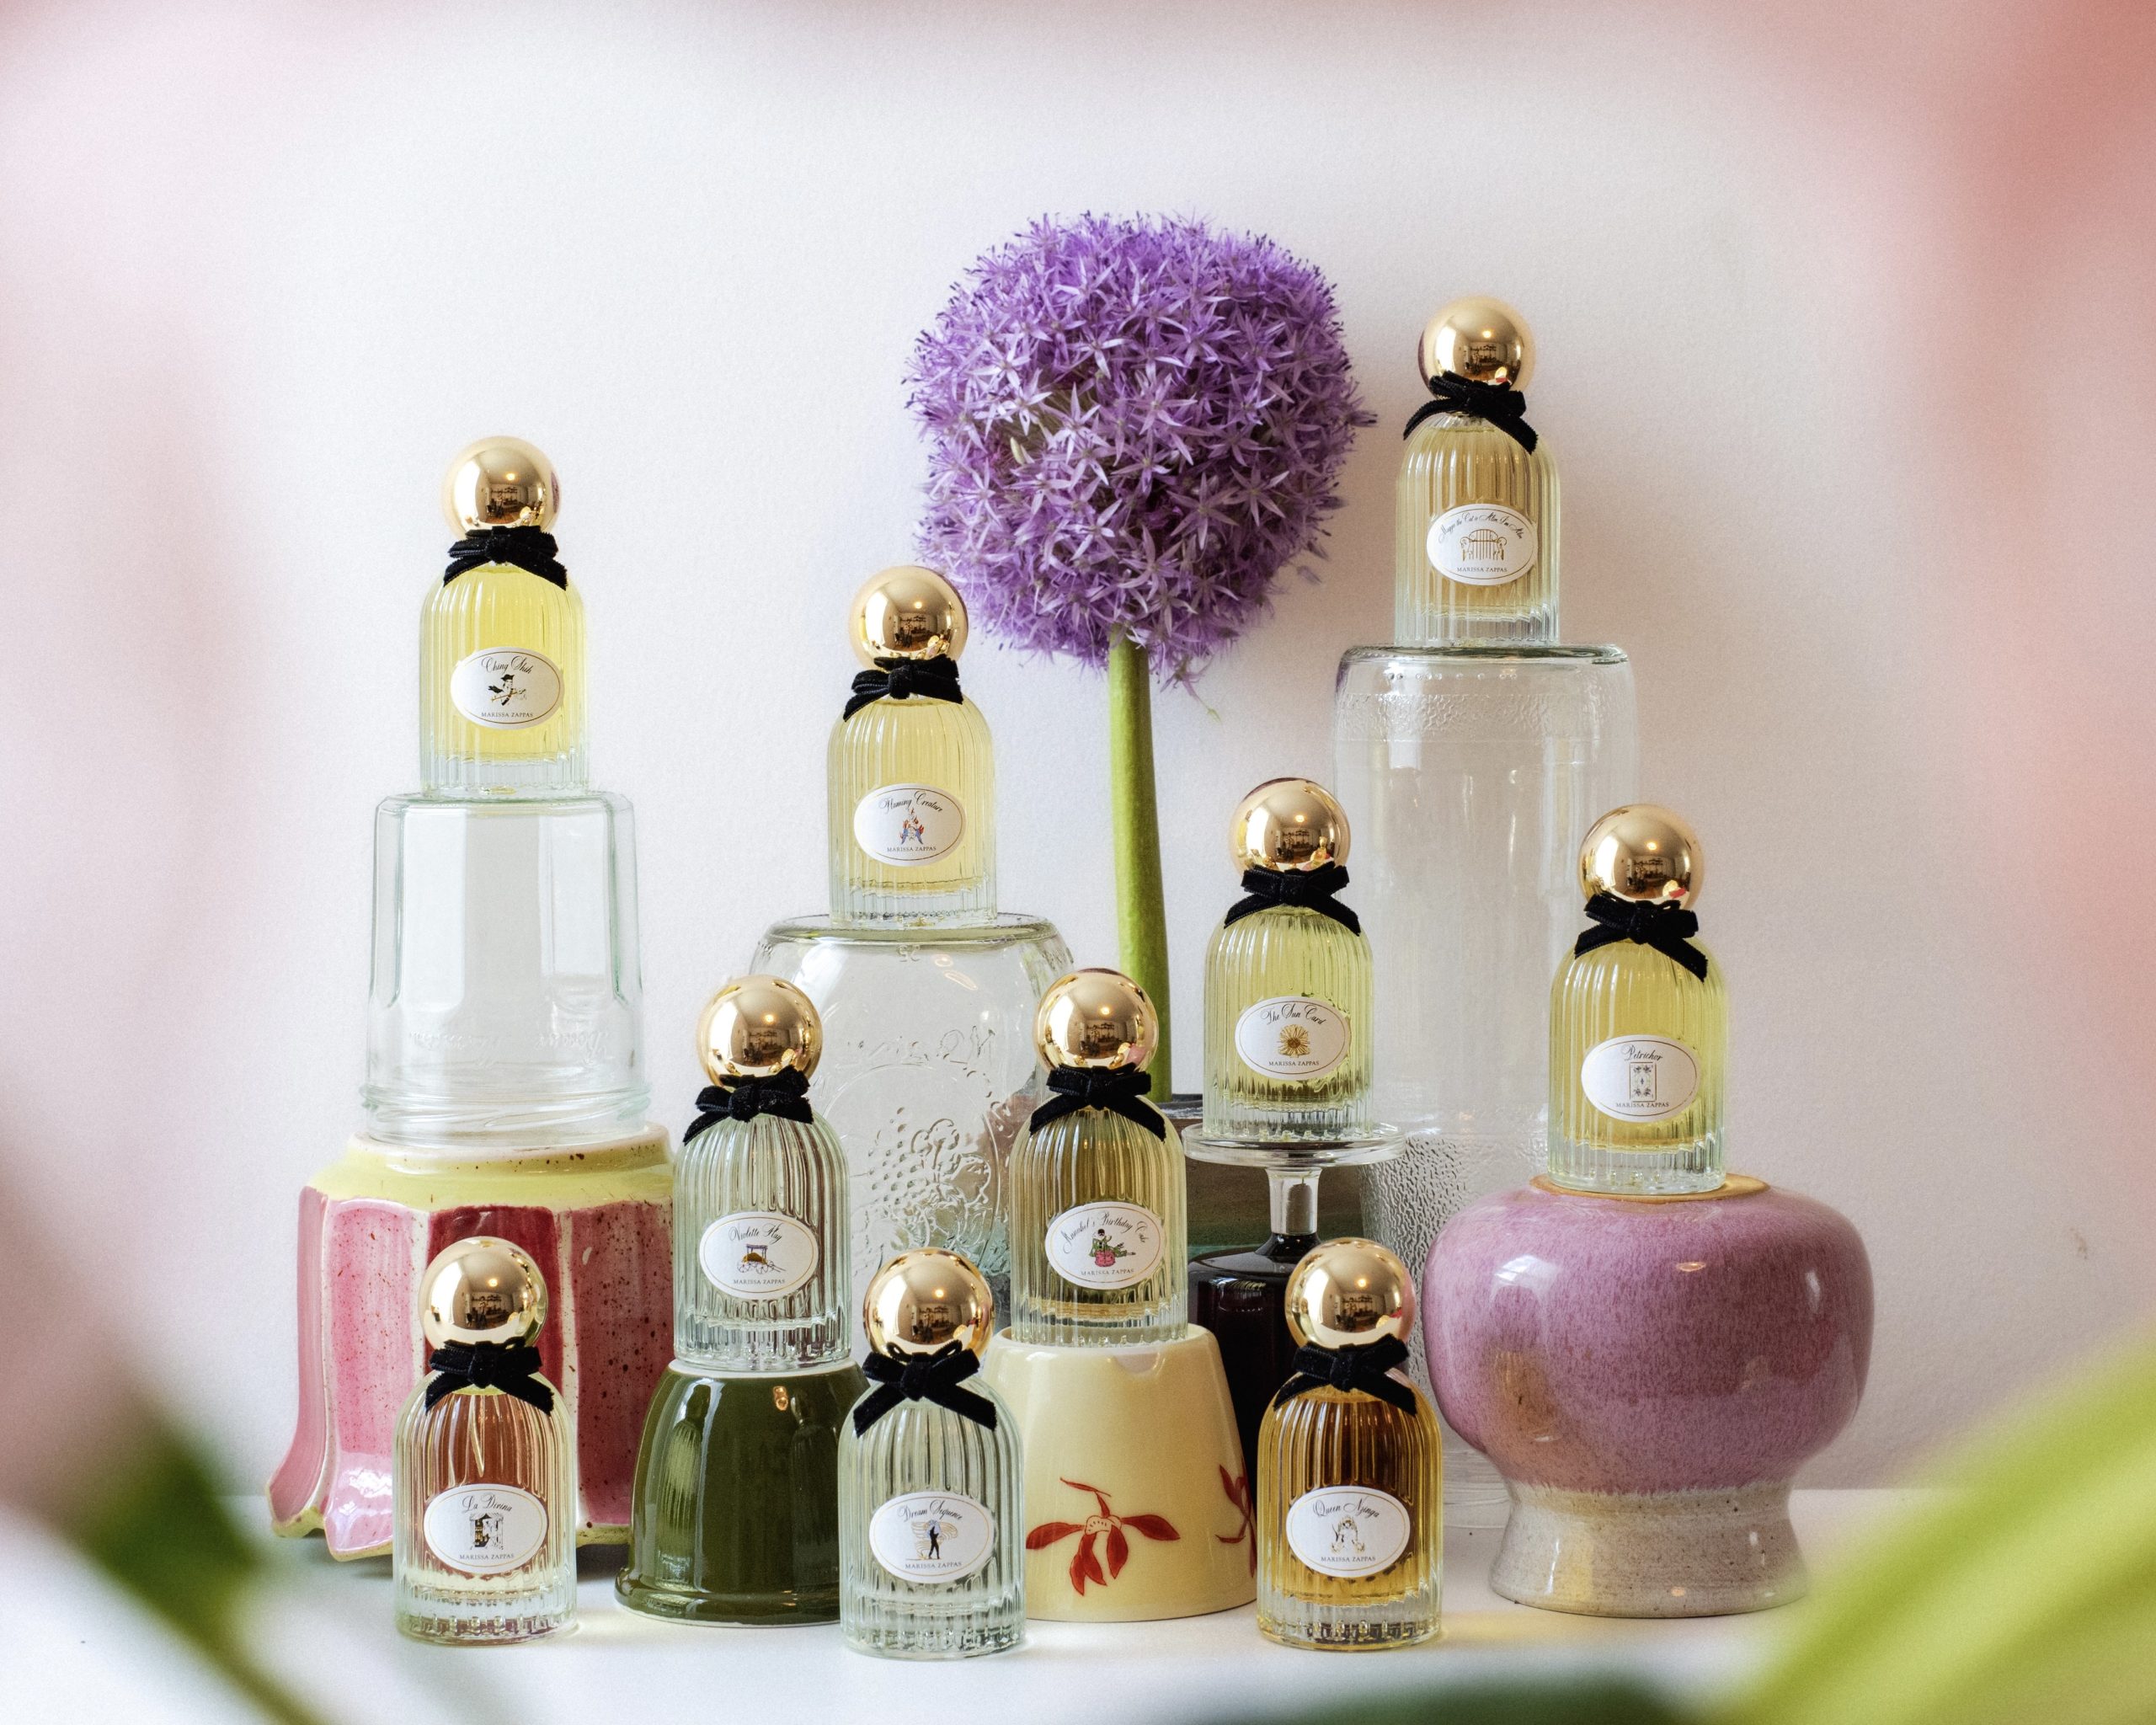 Marissa Zappas’ Charming New Perfume Bottles Pay Homage to the Spirit of Classic French Houses